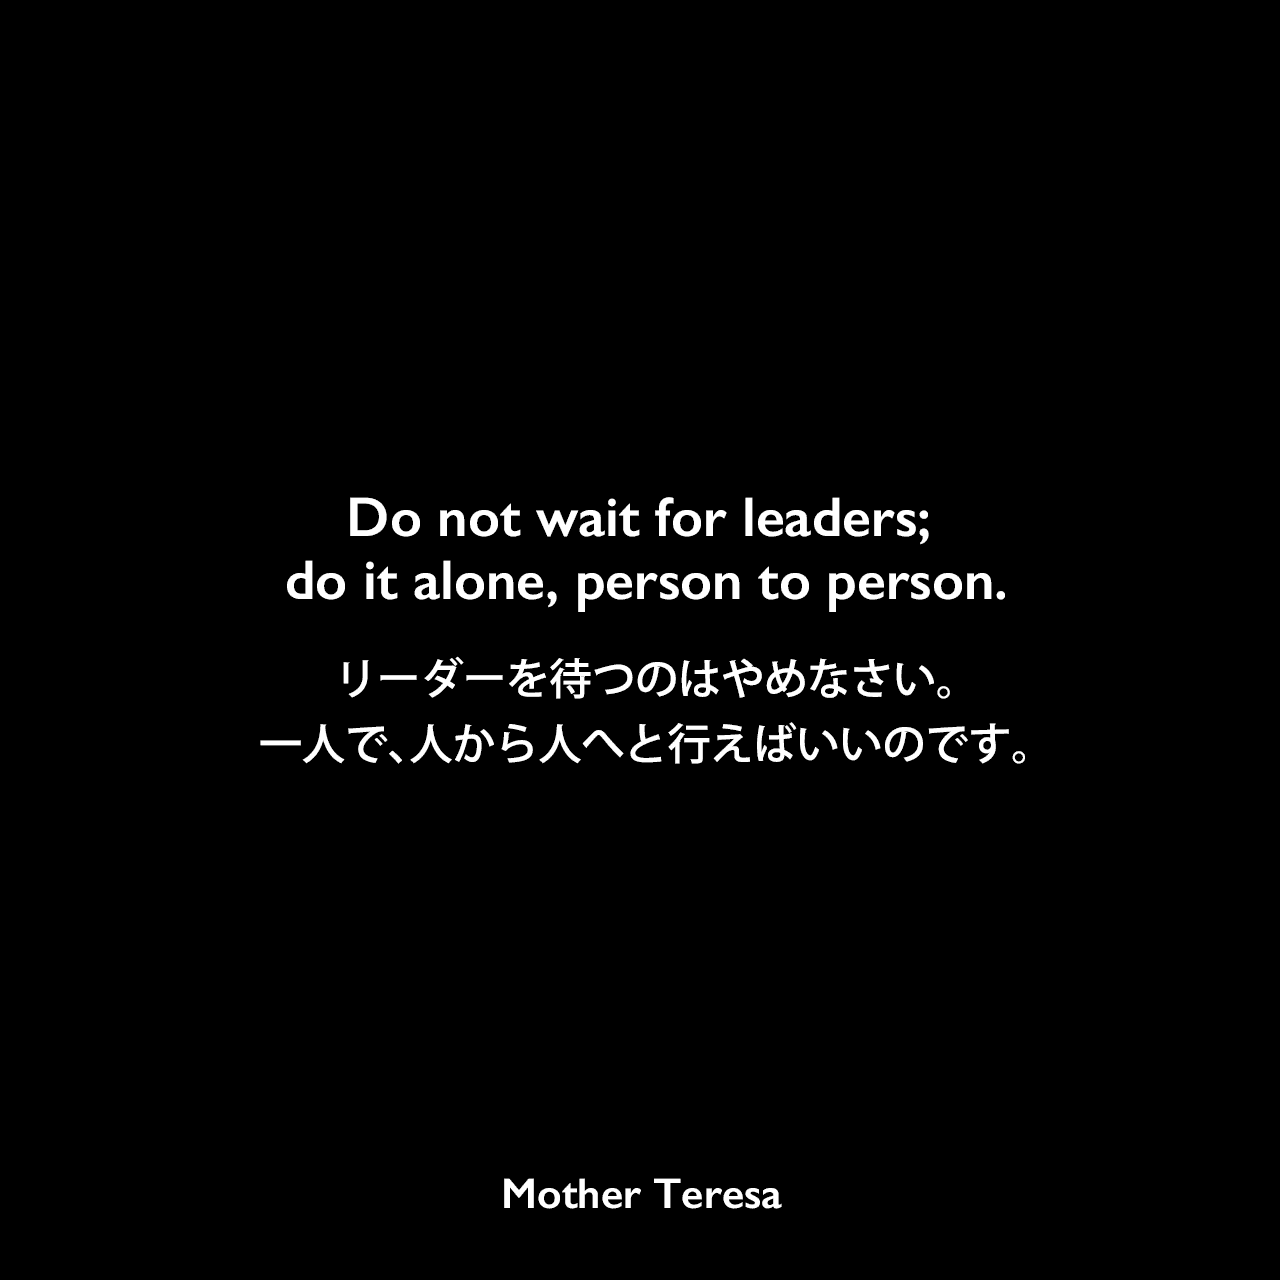 Do not wait for leaders; do it alone, person to person.リーダーを待つのはやめなさい。一人で、人から人へと行えばいいのです。Mother Teresa